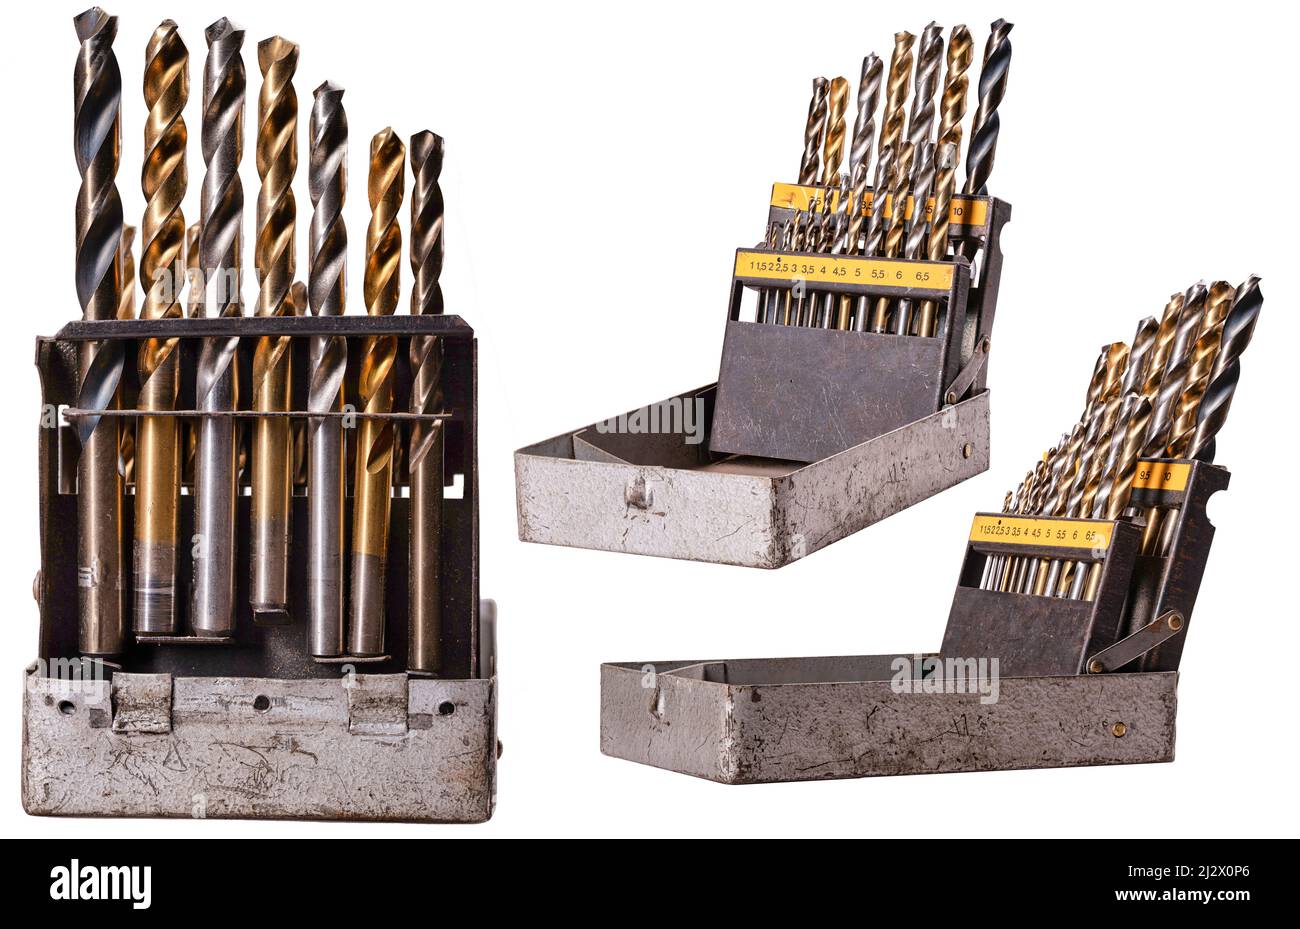 HSS drills placed in a metal box used to make holes in the metal. Isolated background. Stock Photo